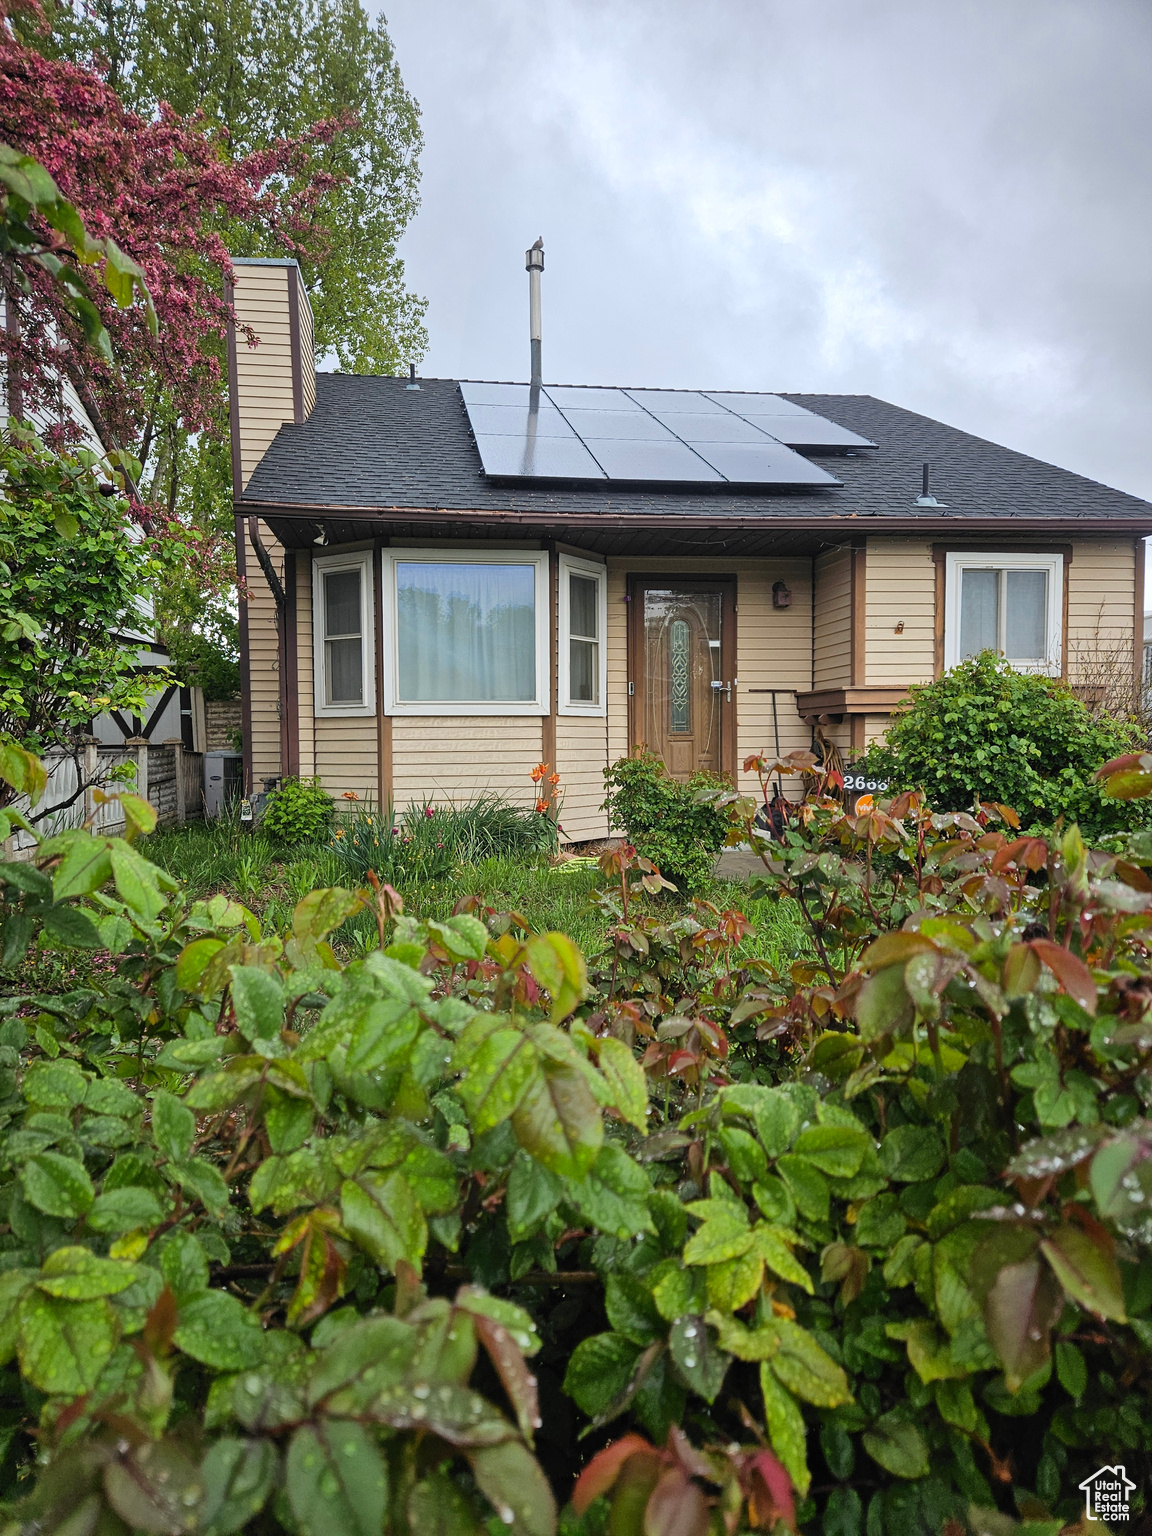 View of front of property featuring solar panels